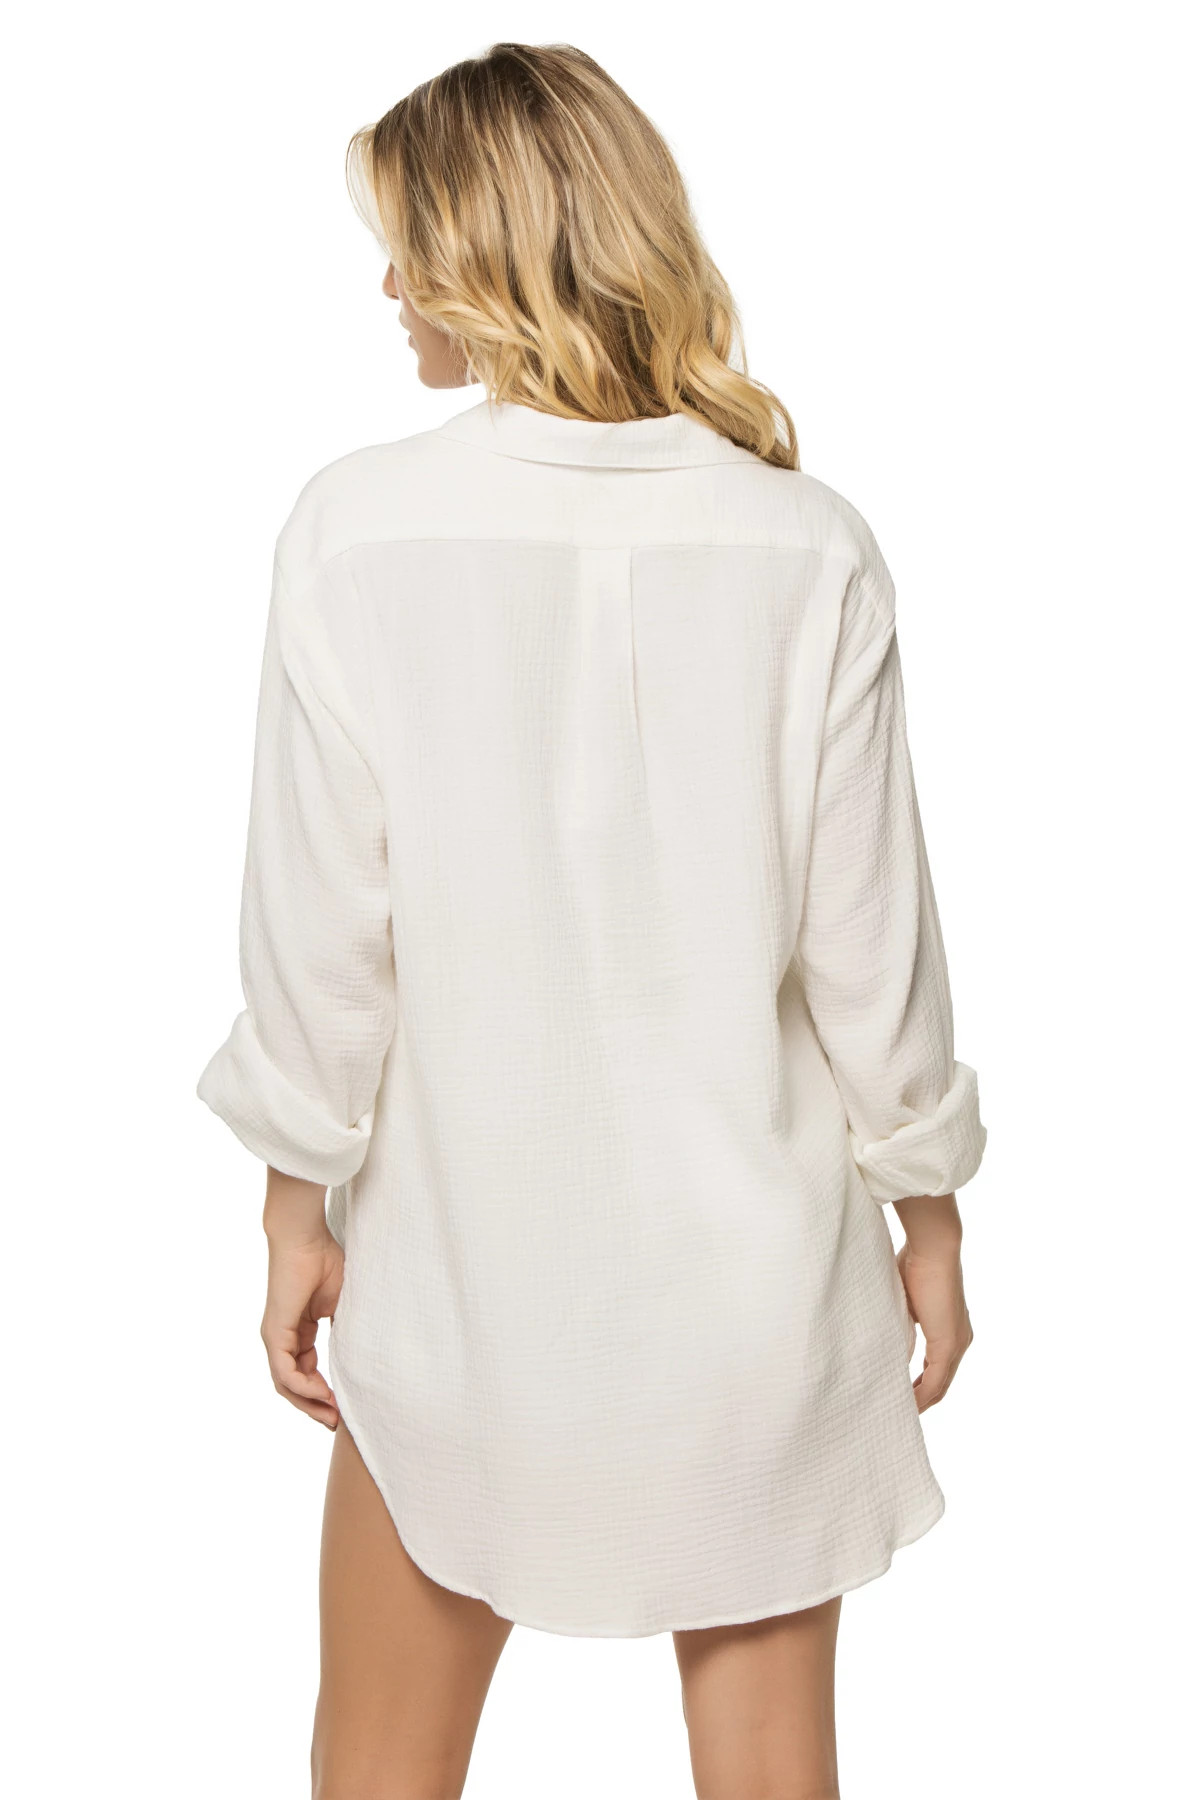 WHITE The Favorite Shirt Dress image number 2